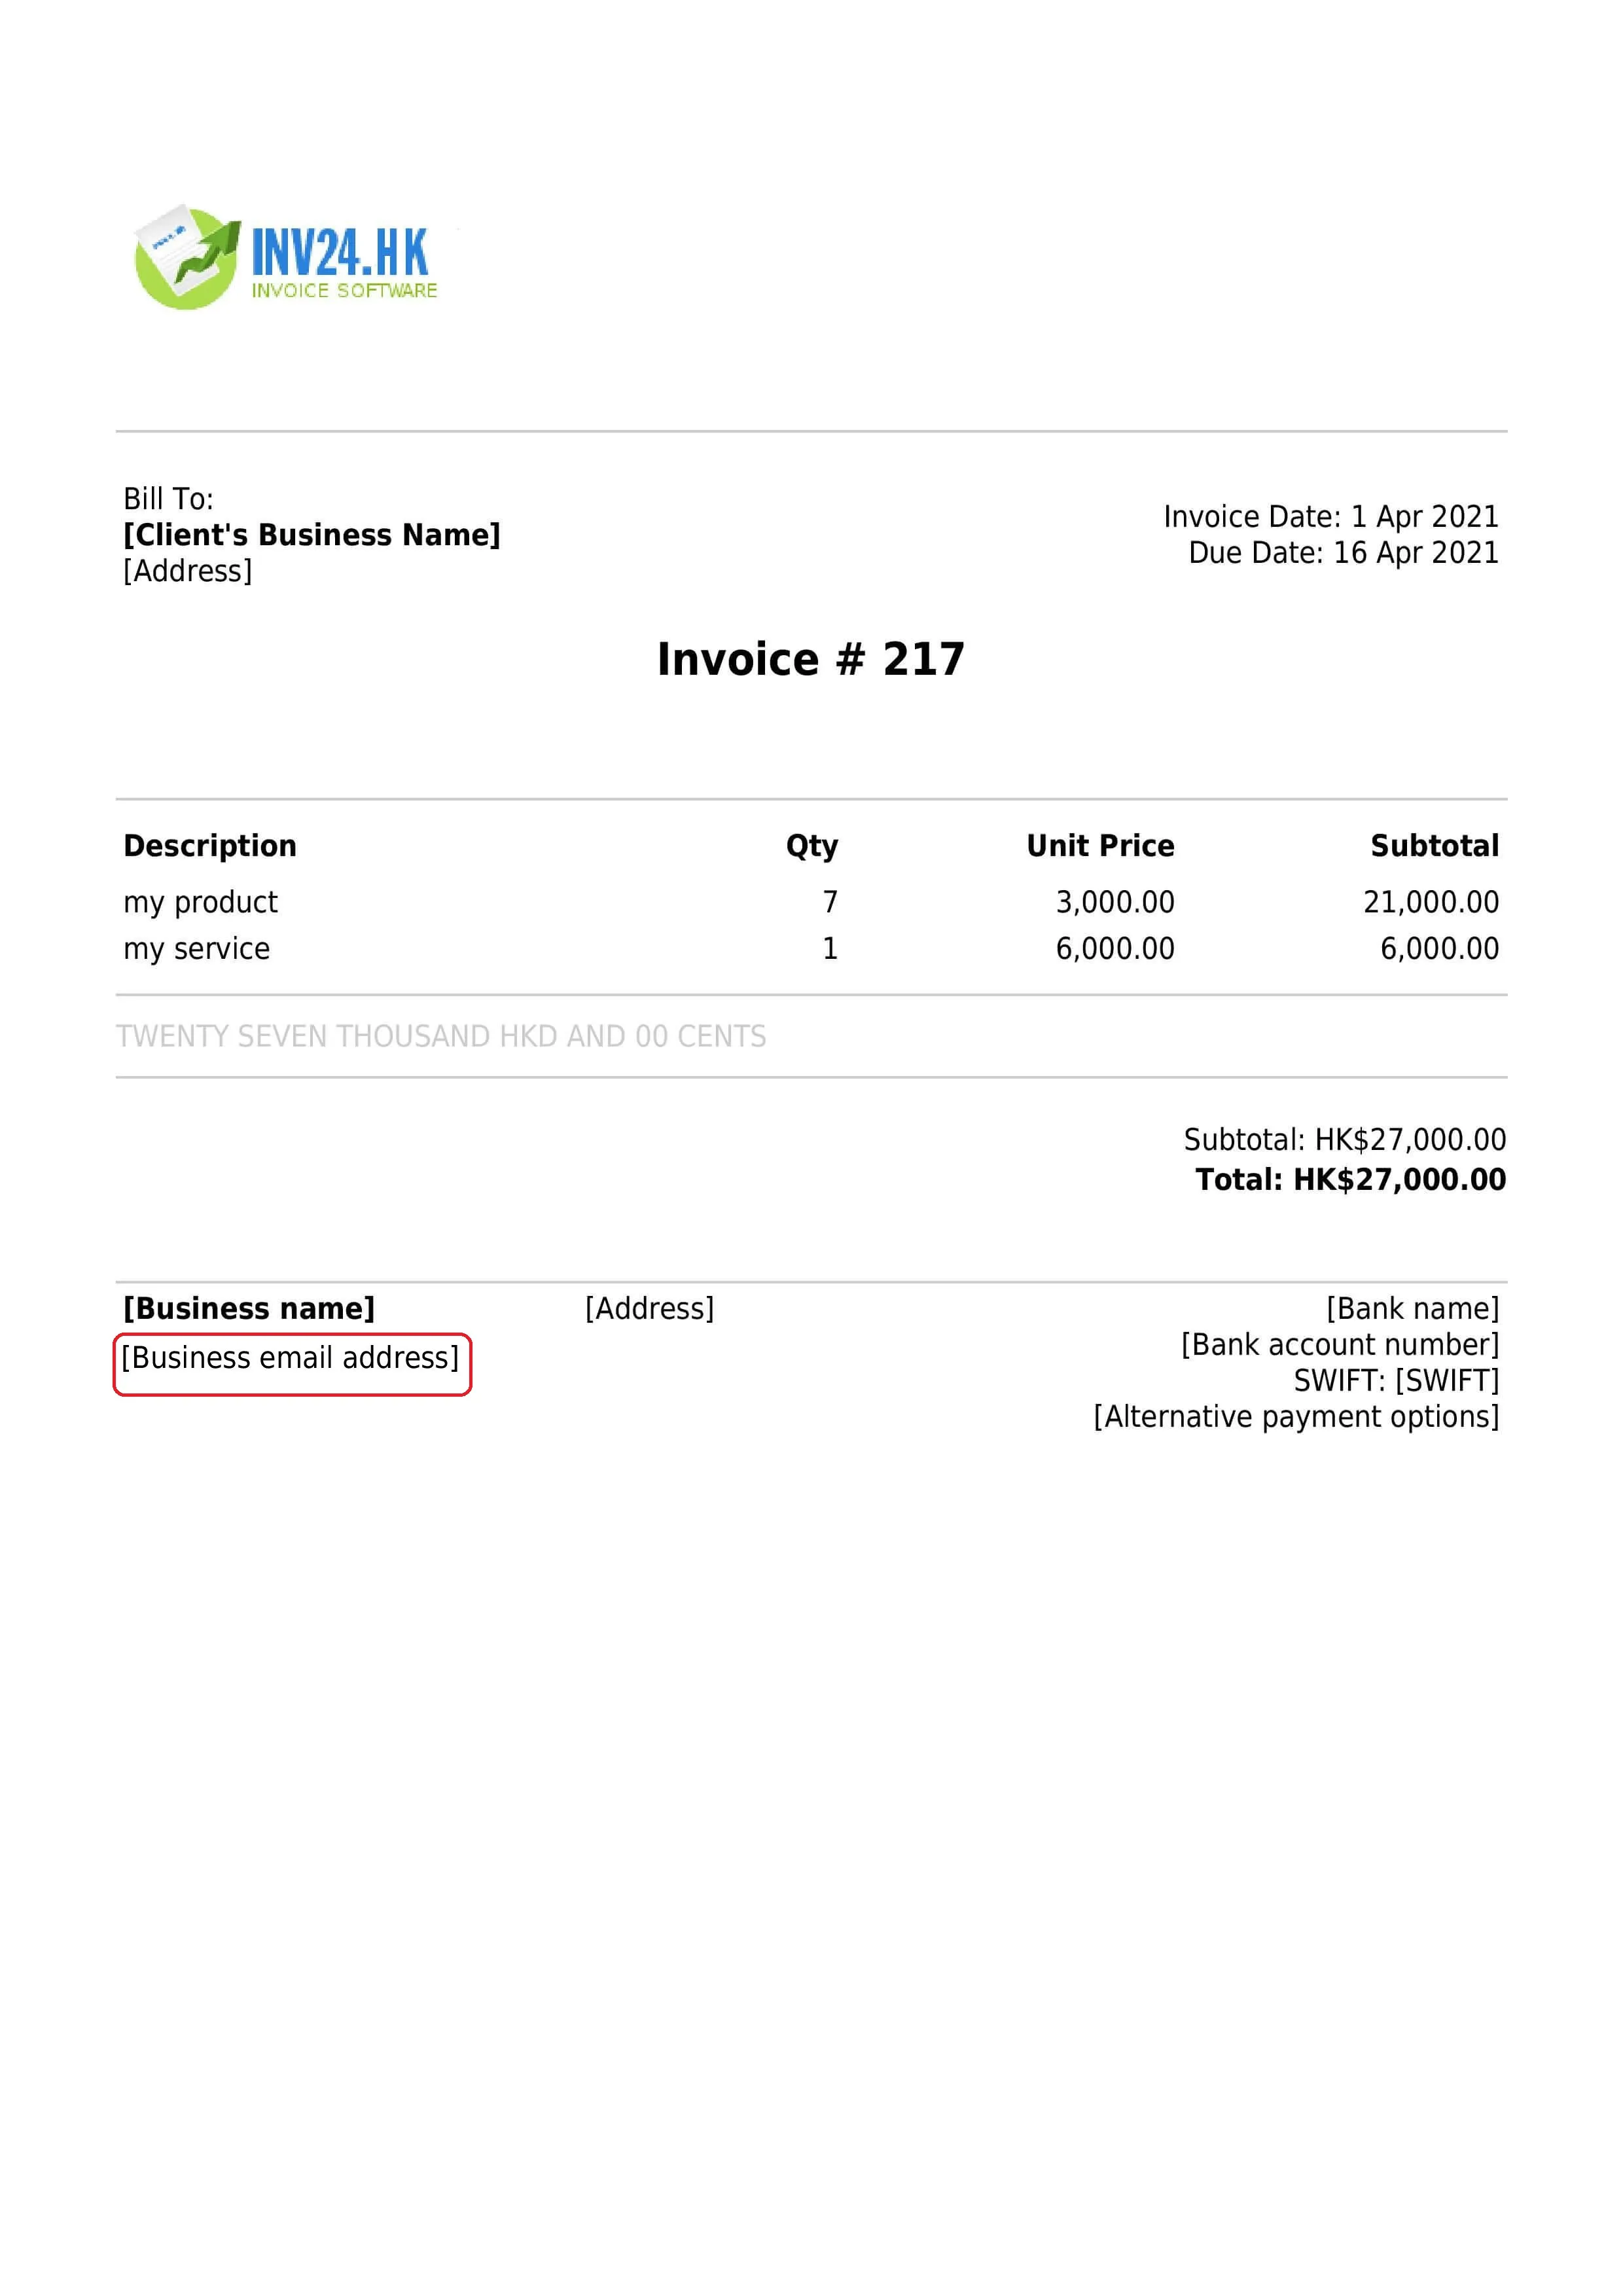 Business email address on the invoice